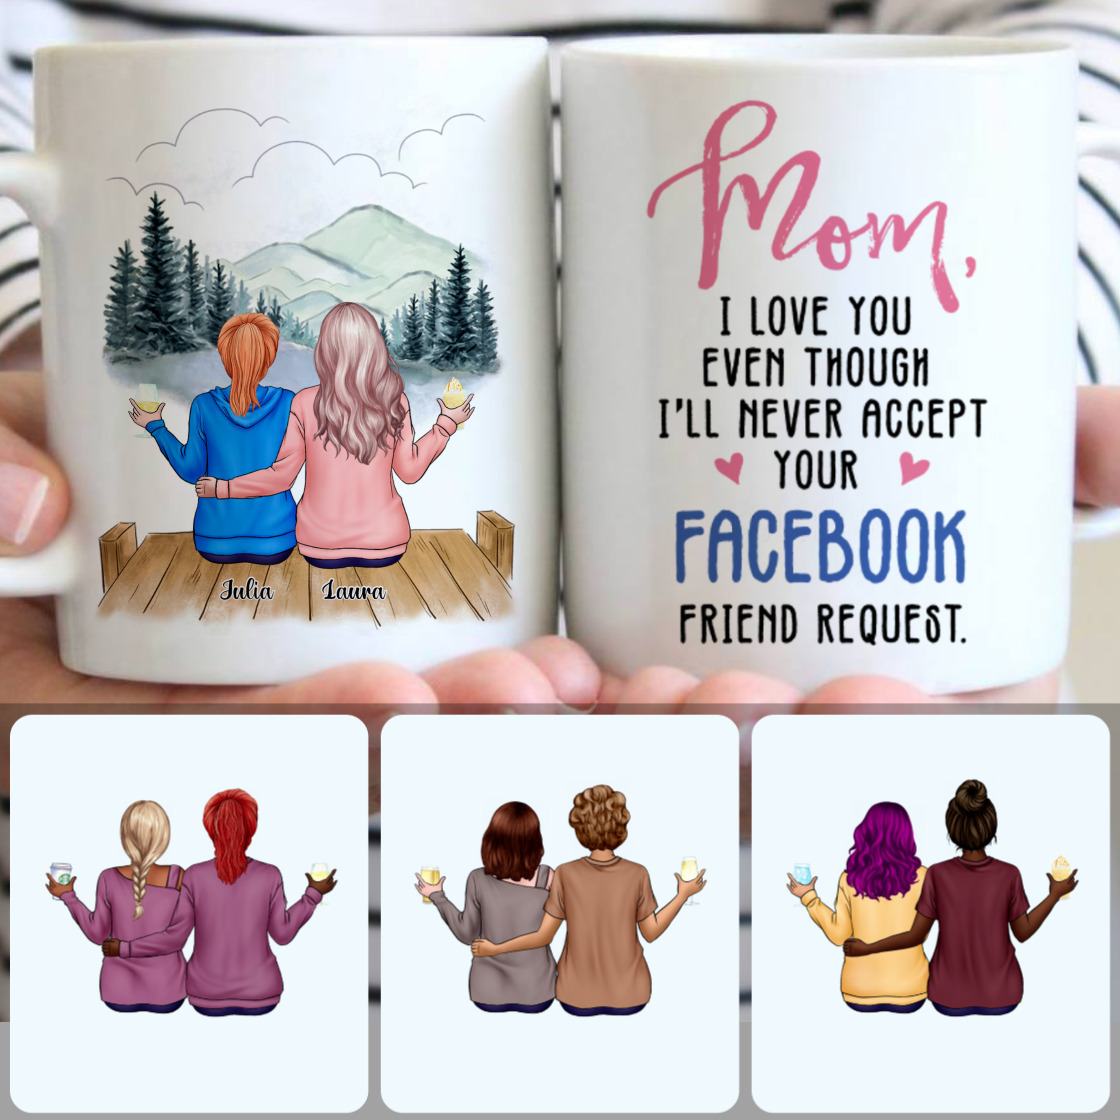 Personalized Mug, Surprise Gifts For Stepmom, Mother & Daughter Customized Coffee Mug With Names